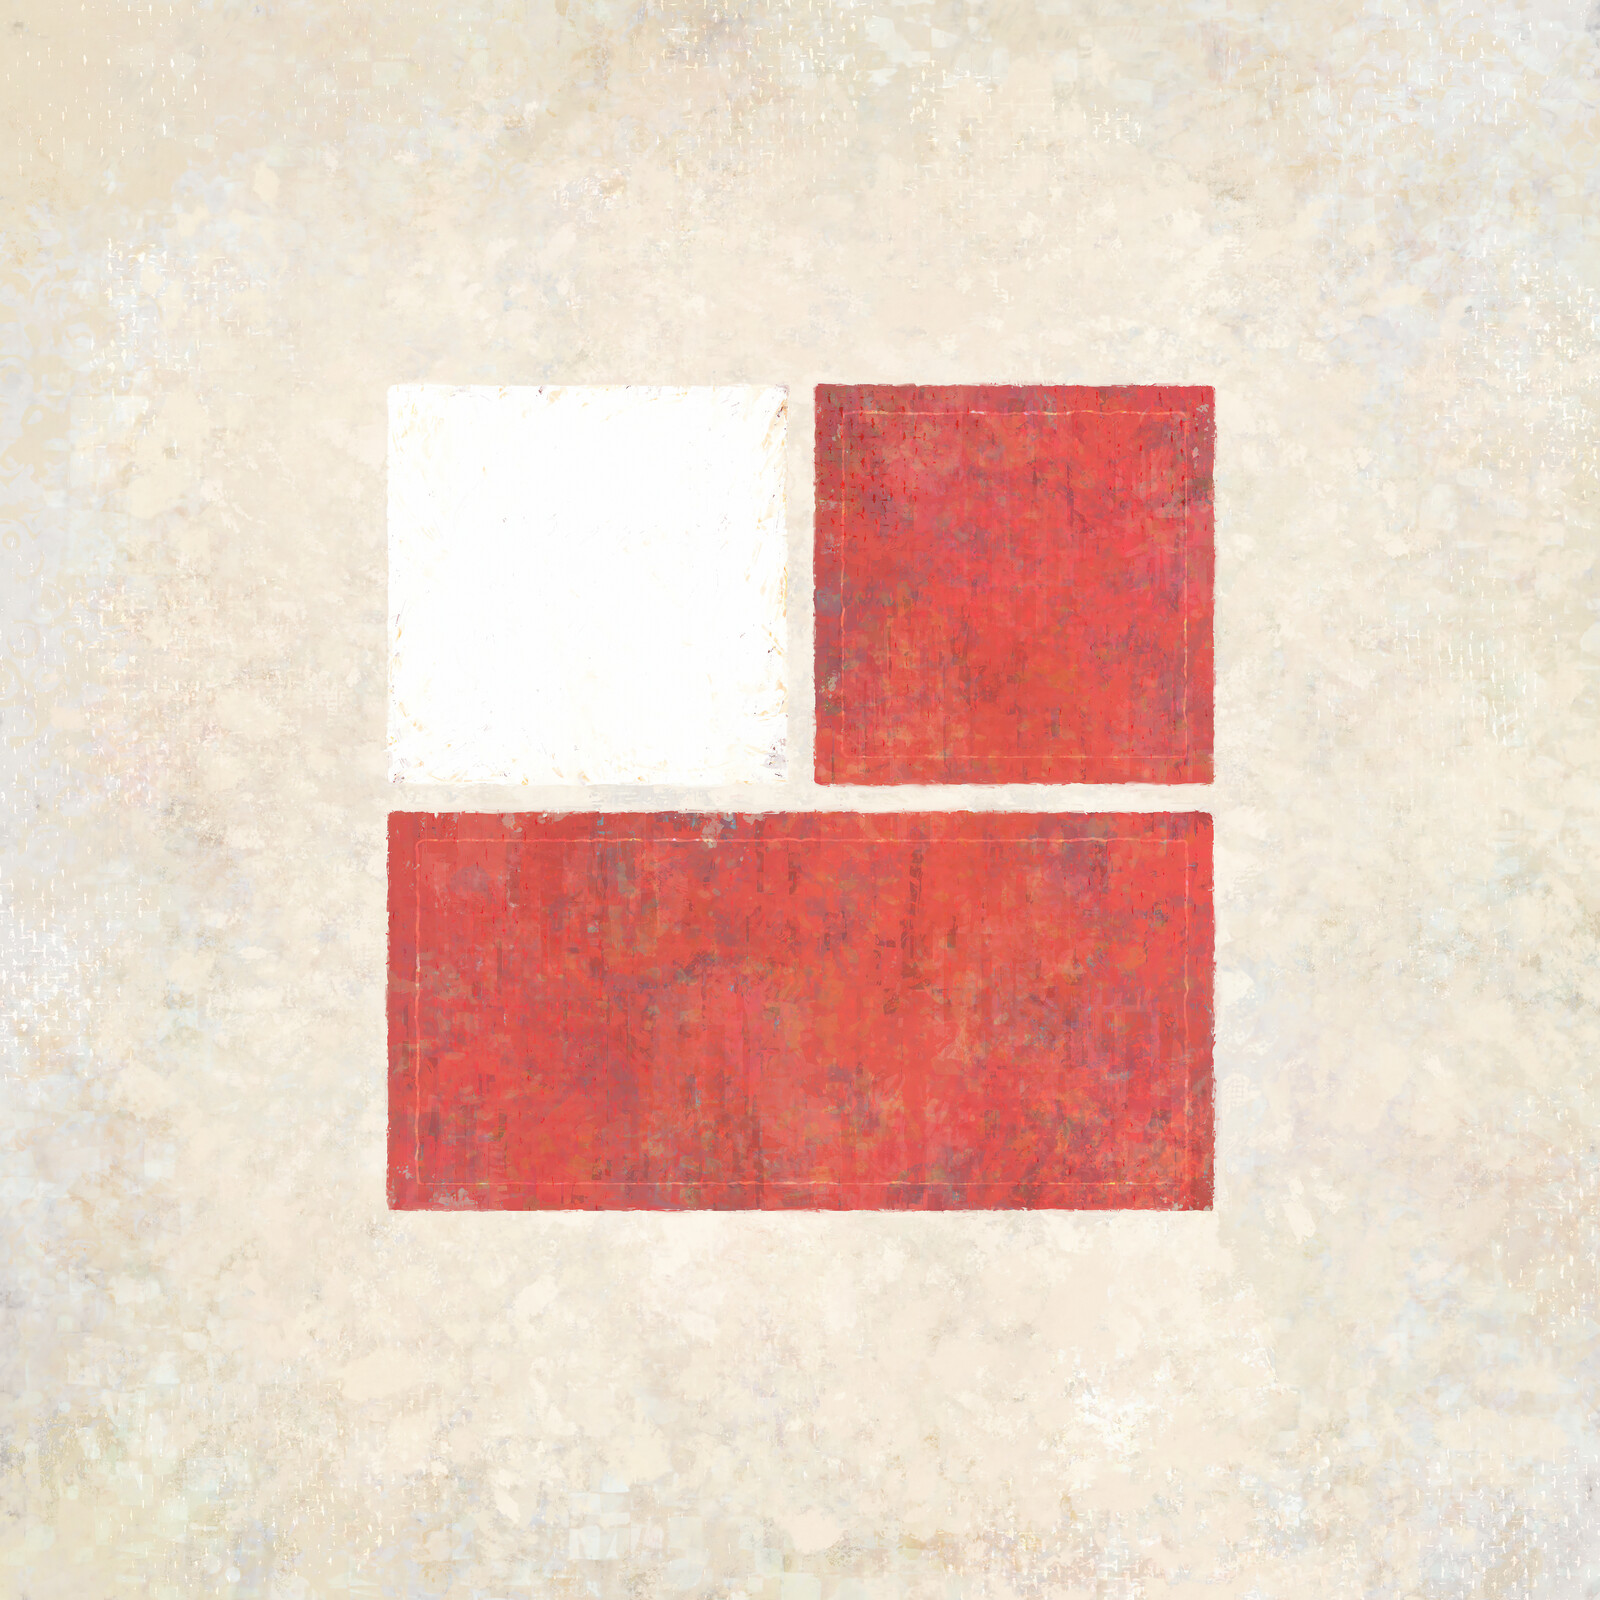 A white square next to a red square, with a red horizontal rectangle underneath, all forming a larger square.